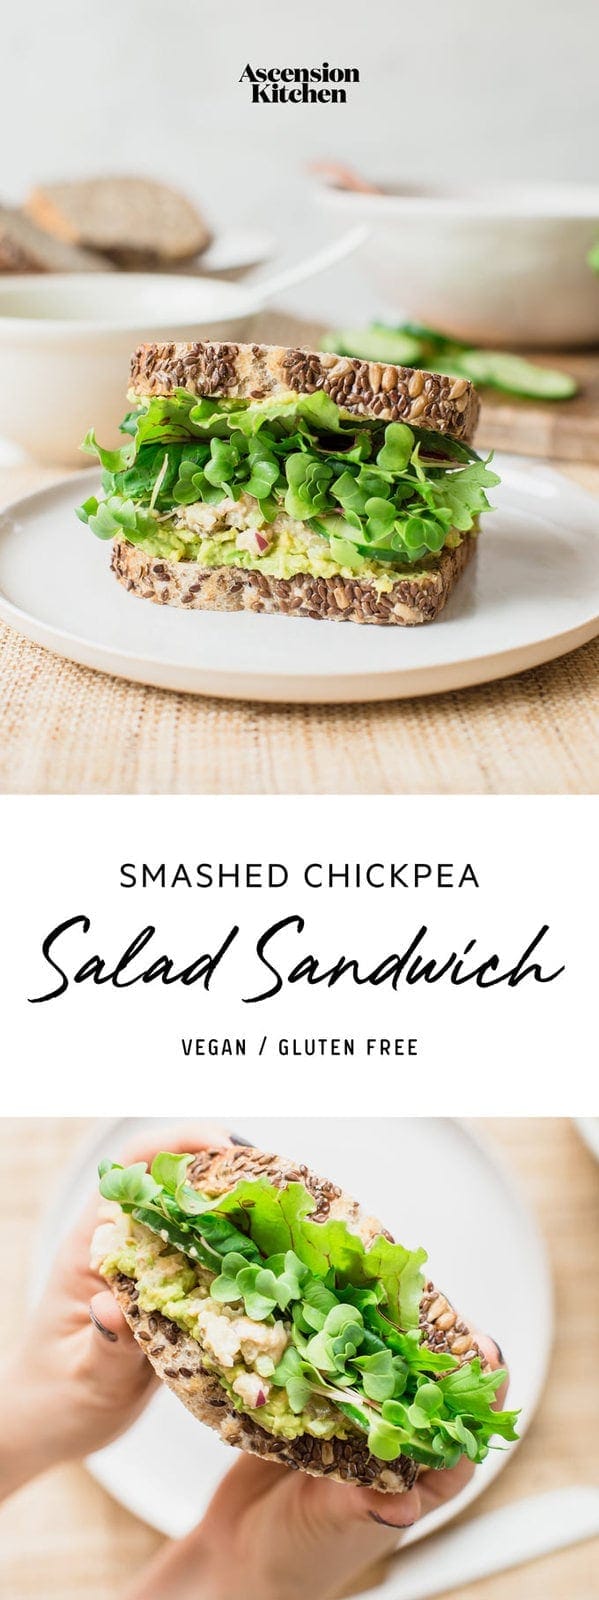 The ultimate vegan Smashed Chickpea Salad Sandwich! Hold the mayo, I’ll have extra avo. #chickpeasaladsandwich #vegetarianchickpeasandwich #nomayo #mocktuna #AscensionKitchen // Pin to your own inspiration board! //